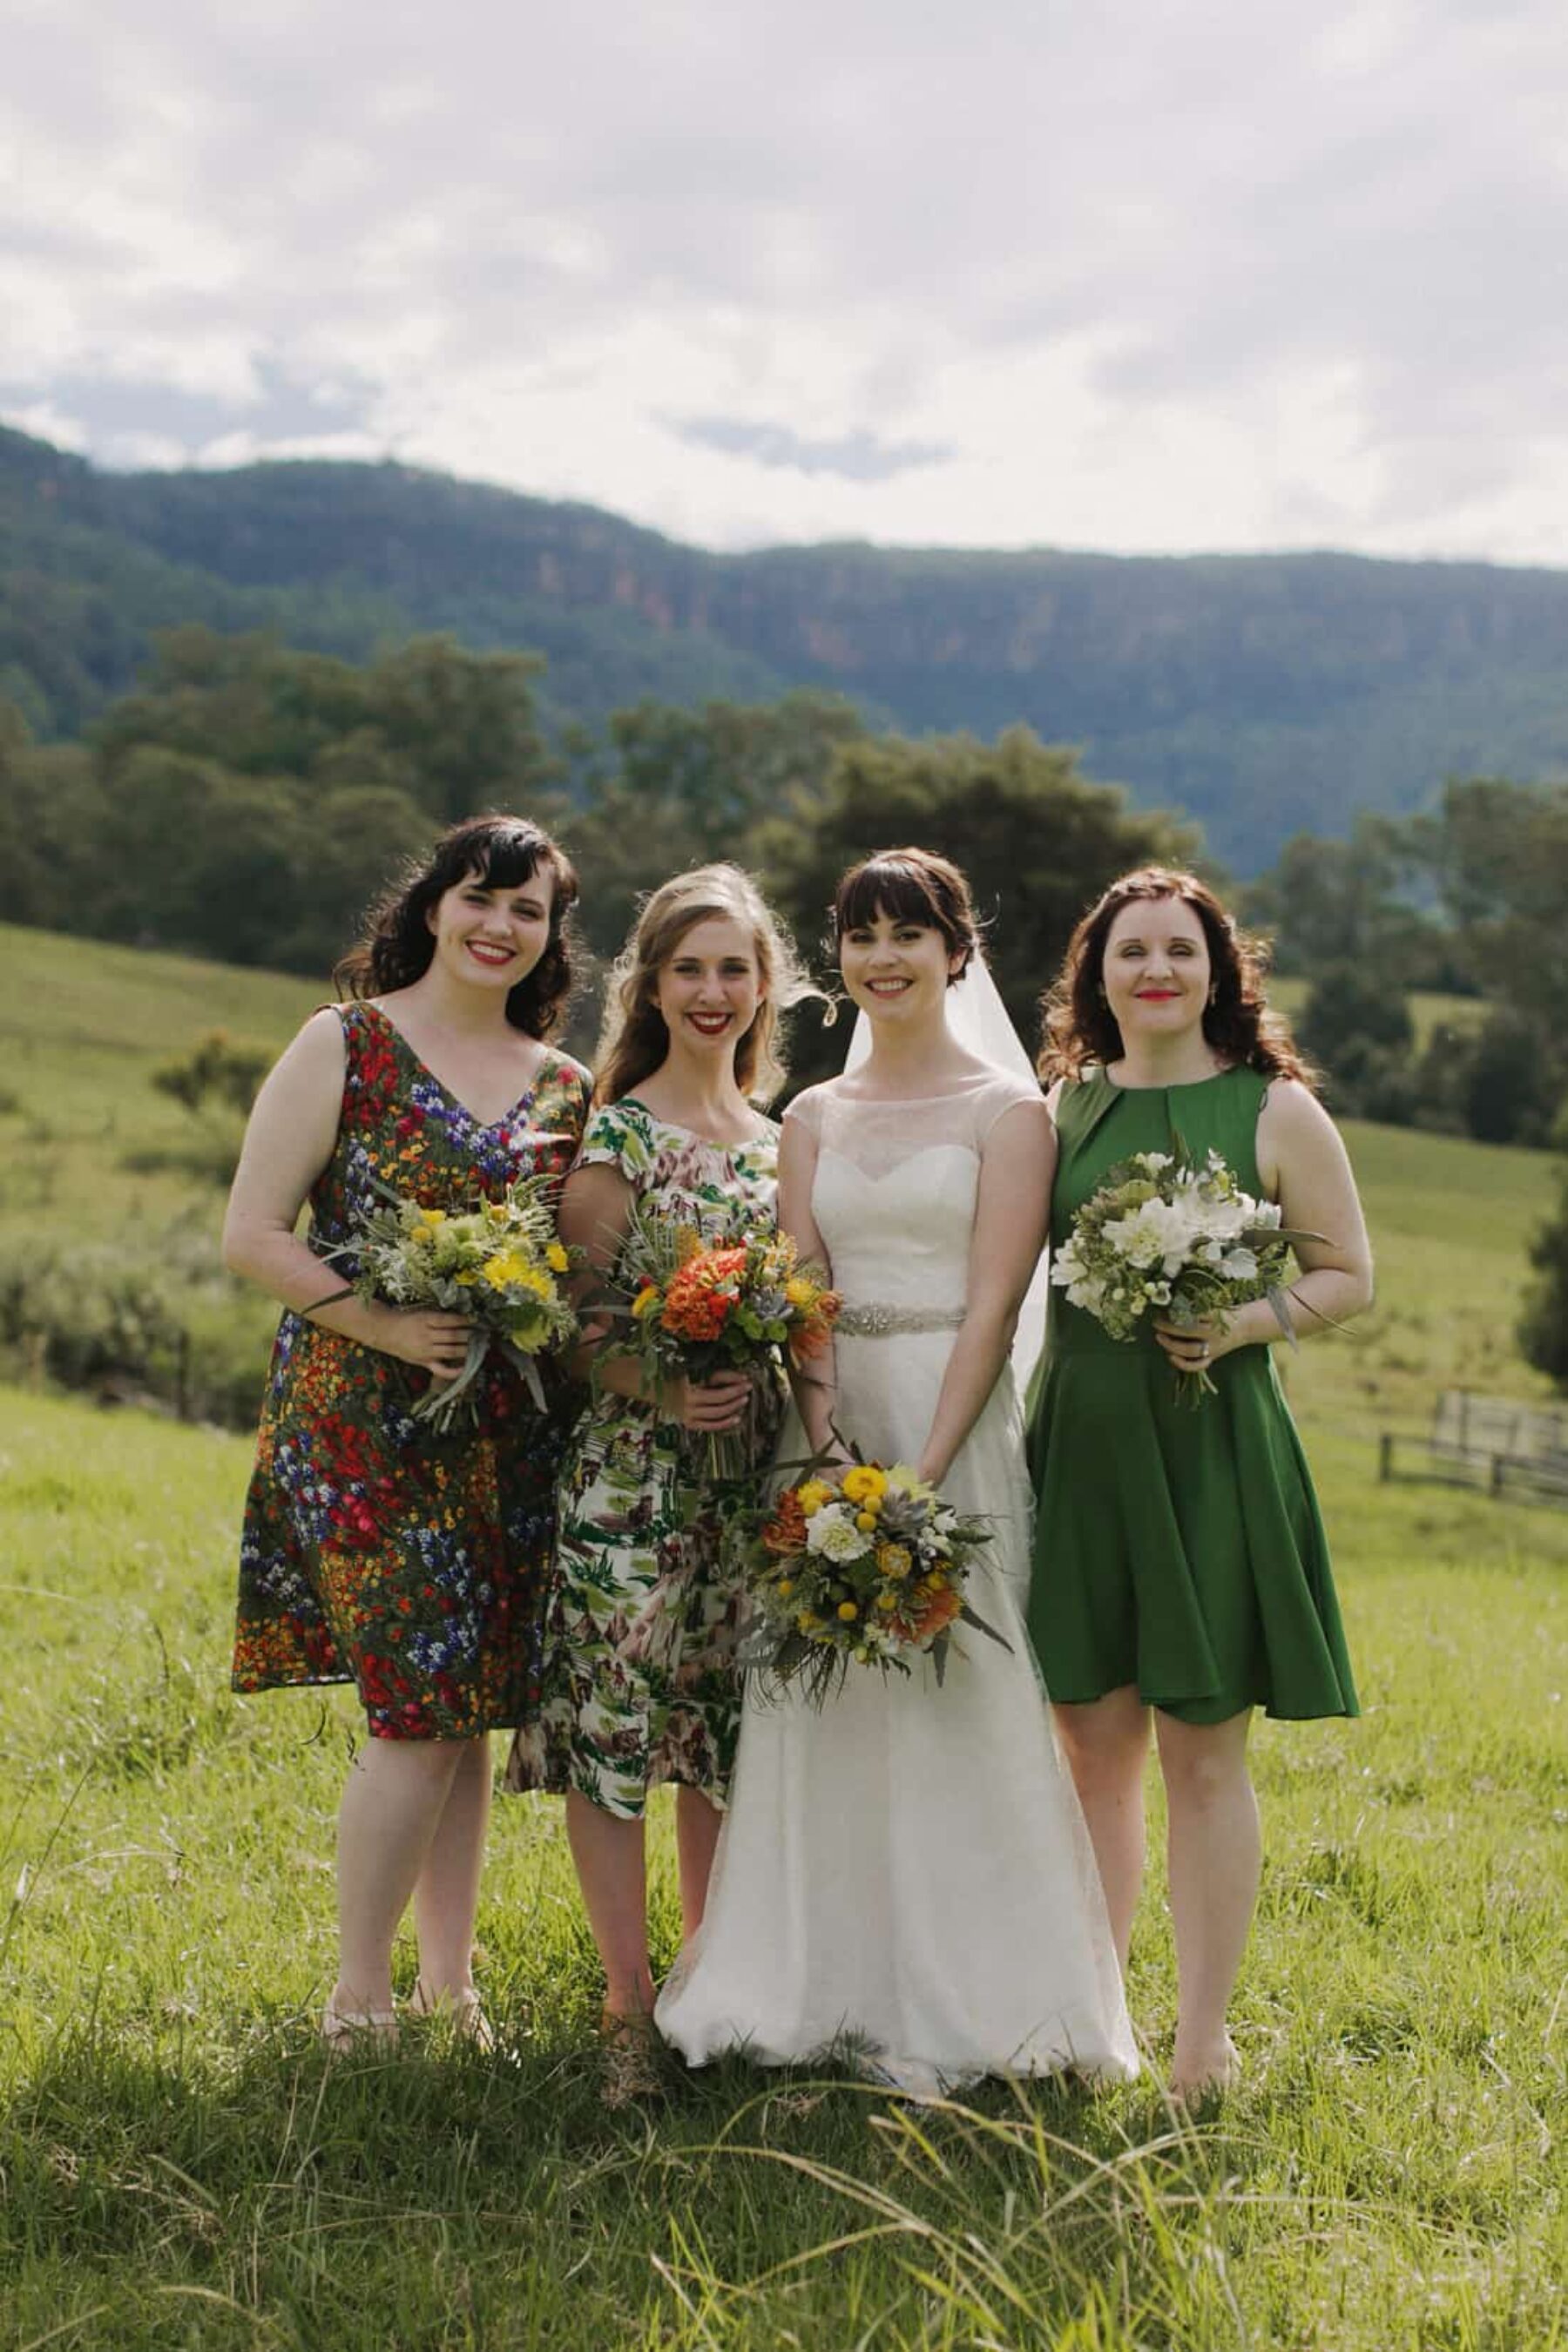 mixed bridesmaid dresses in greens and florals